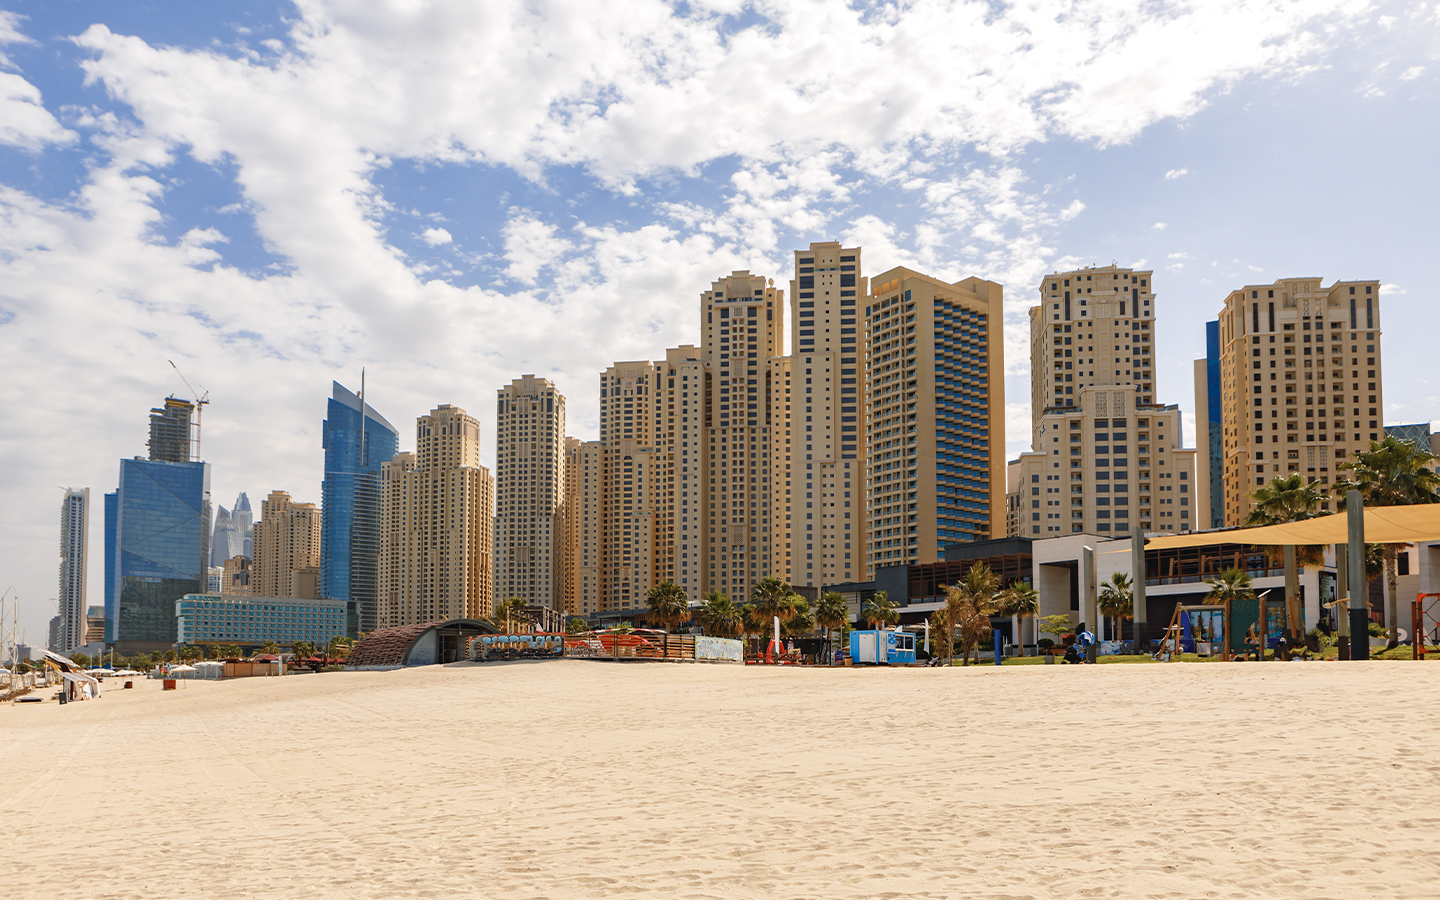 JBR is one of the top areas to rent apartments for a family in dubai